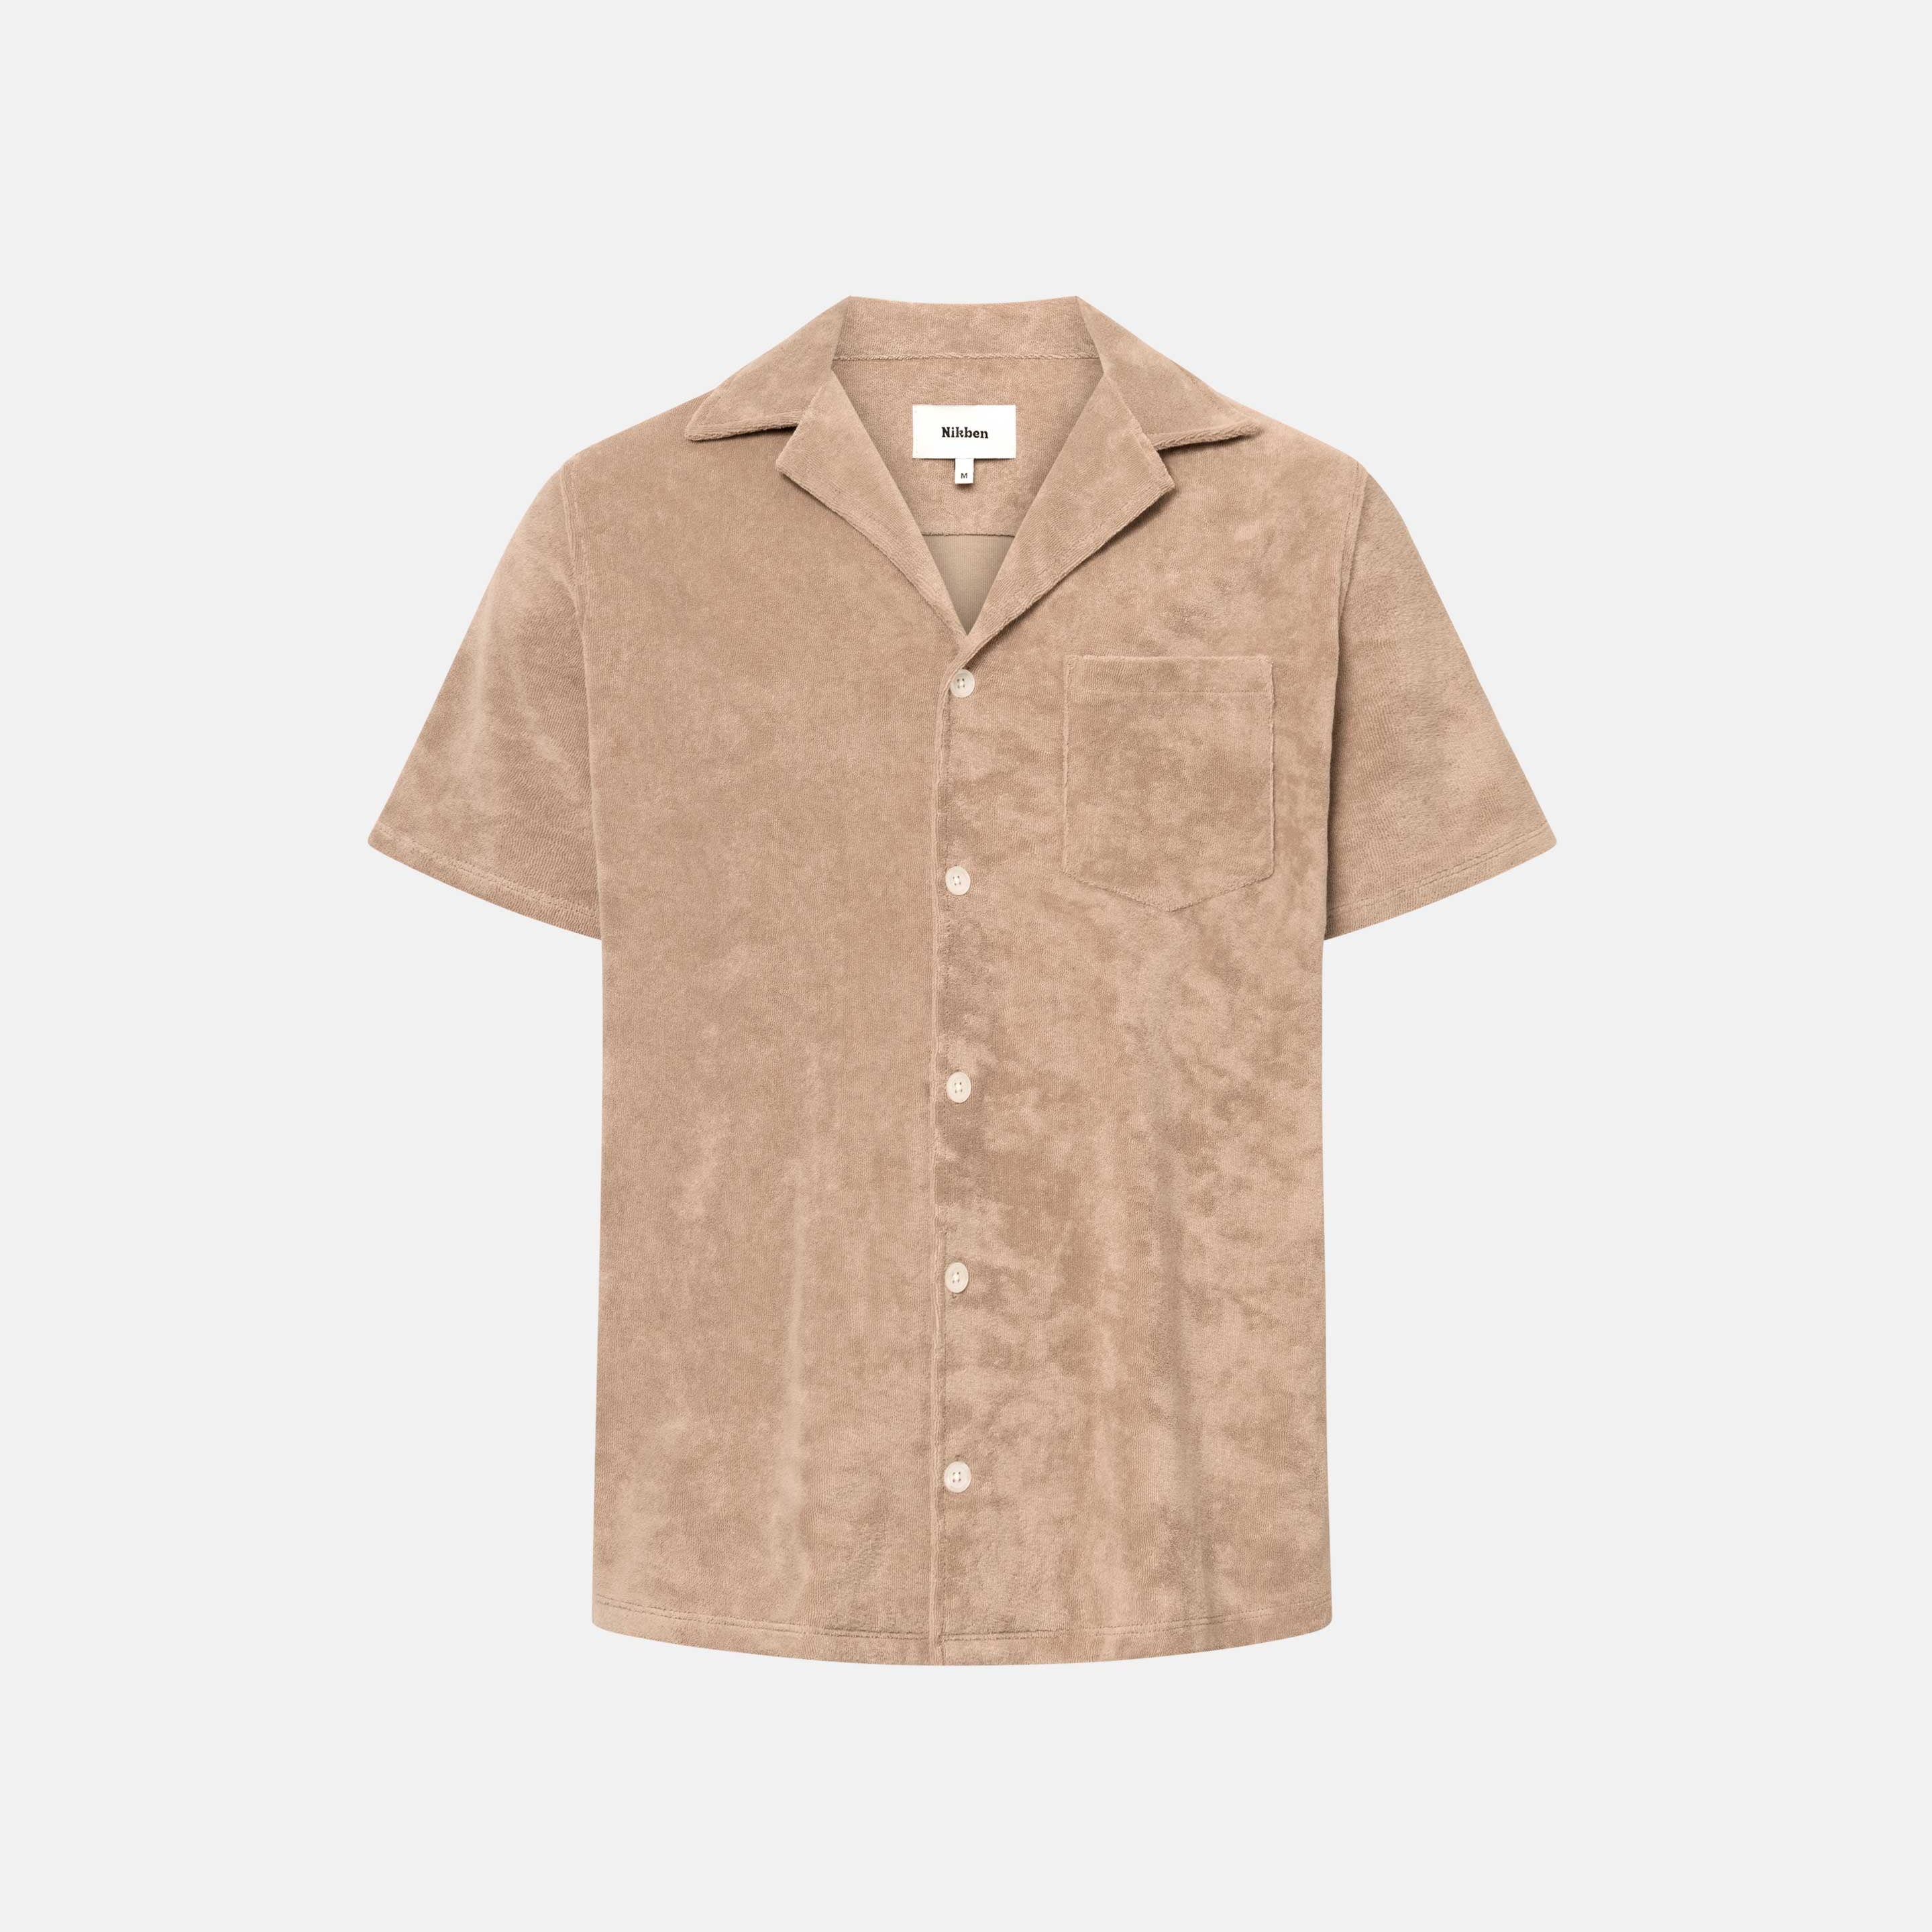 Light brown short sleeve shirt with white button closure and one chest pocket